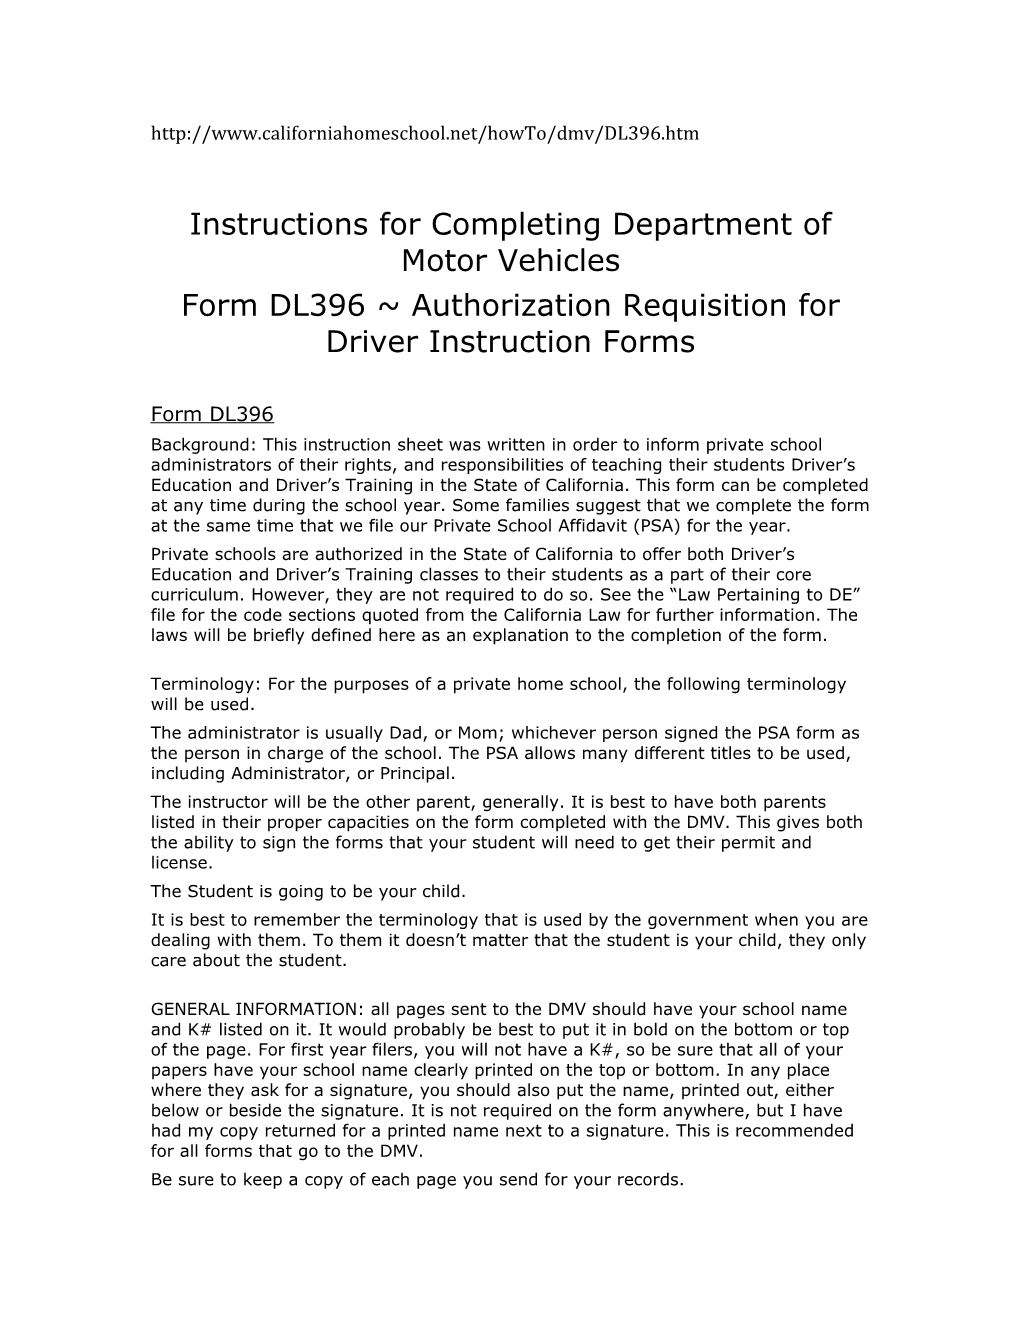 Instructions for Completing Department of Motor Vehicles